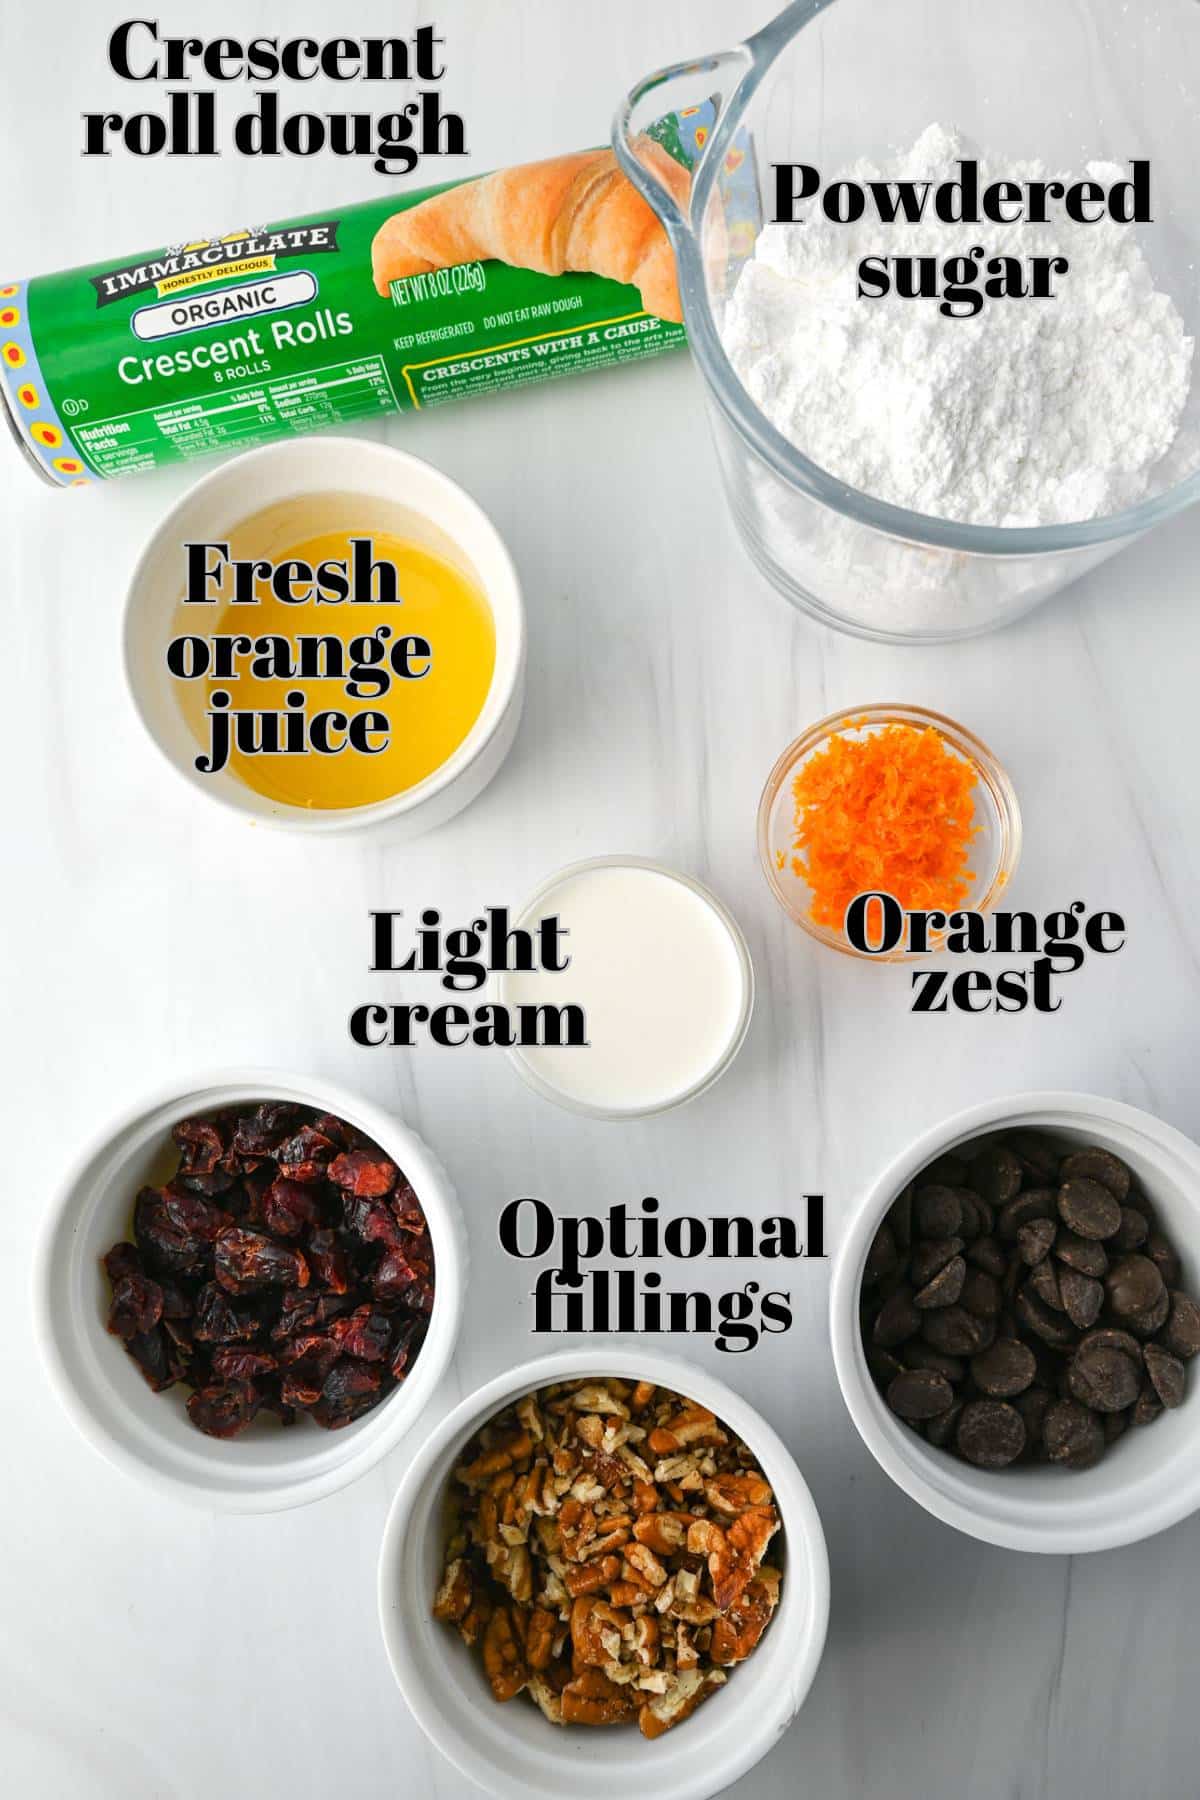 ingredients for easy glazed croissants measured out on a counter